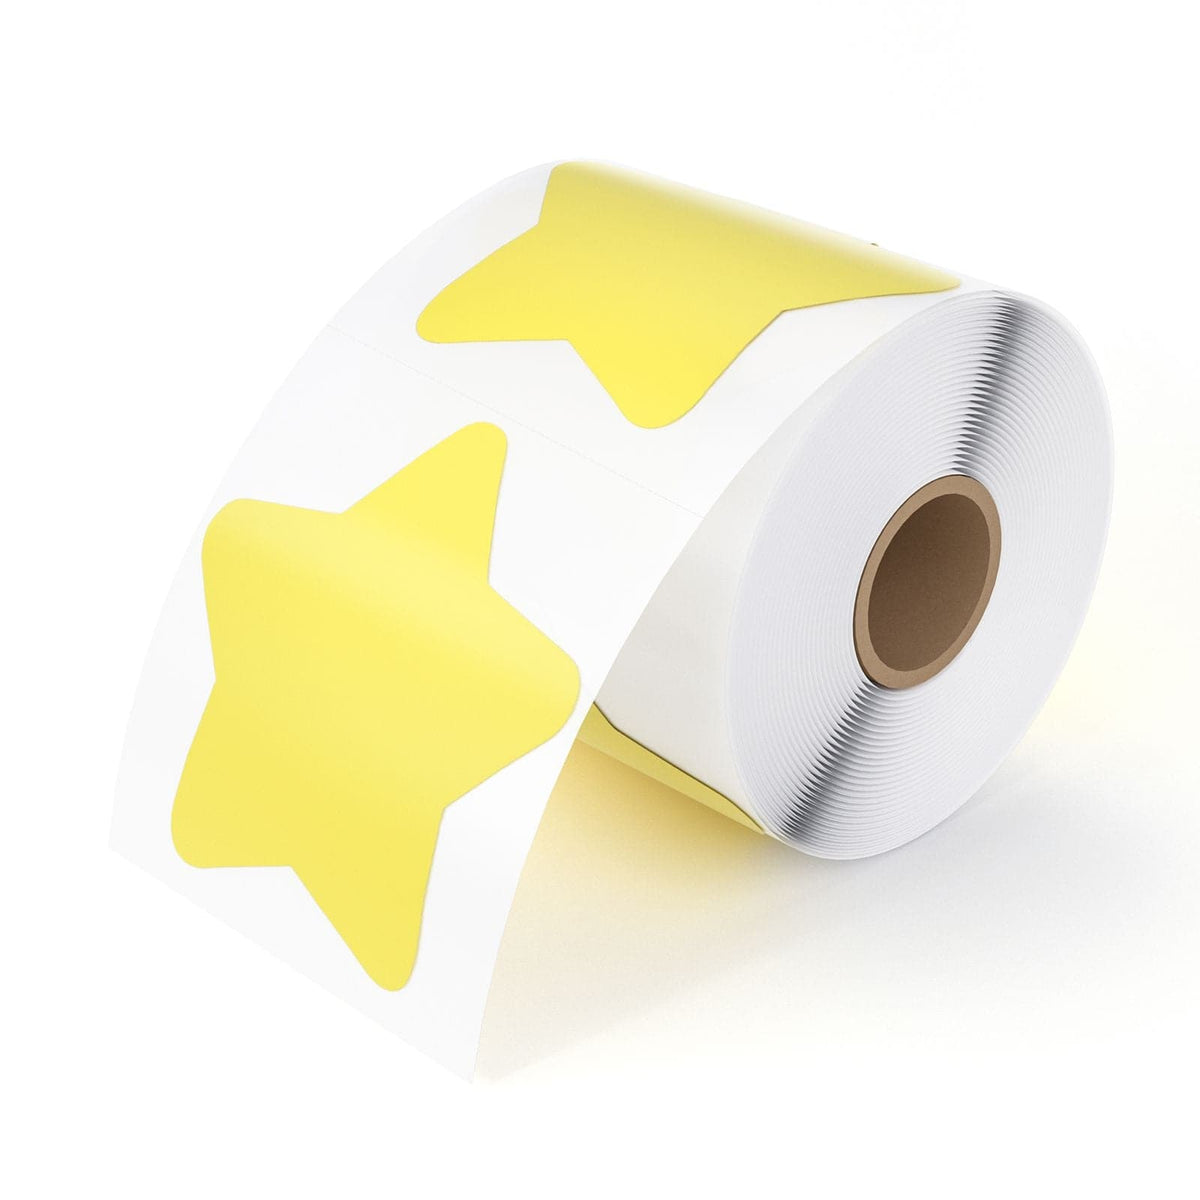 MUNBYN labels, sticker labels, star stickers, Gold, yellow, Pentagonal stickers, Pentagonal labels, yellow stars, blank label, roll labels, diy stickers, etsy labels, print stickers at home